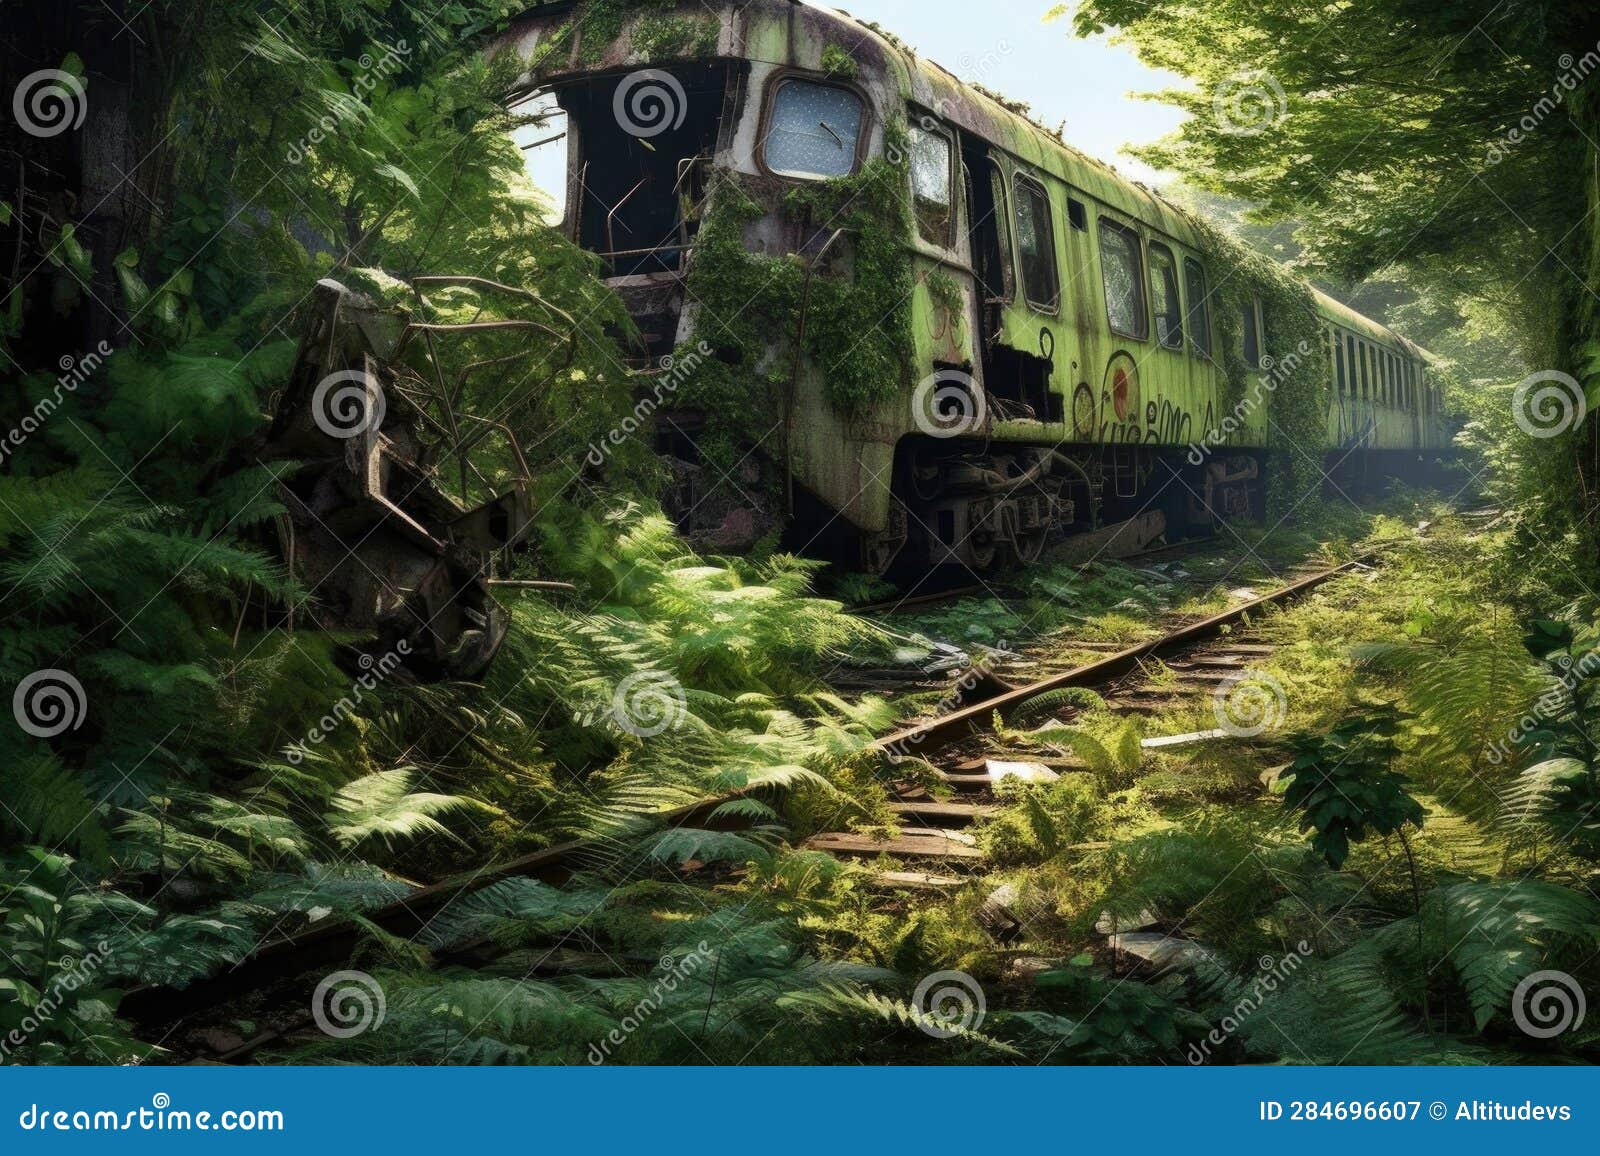 derailed train car with nature reclaiming the area